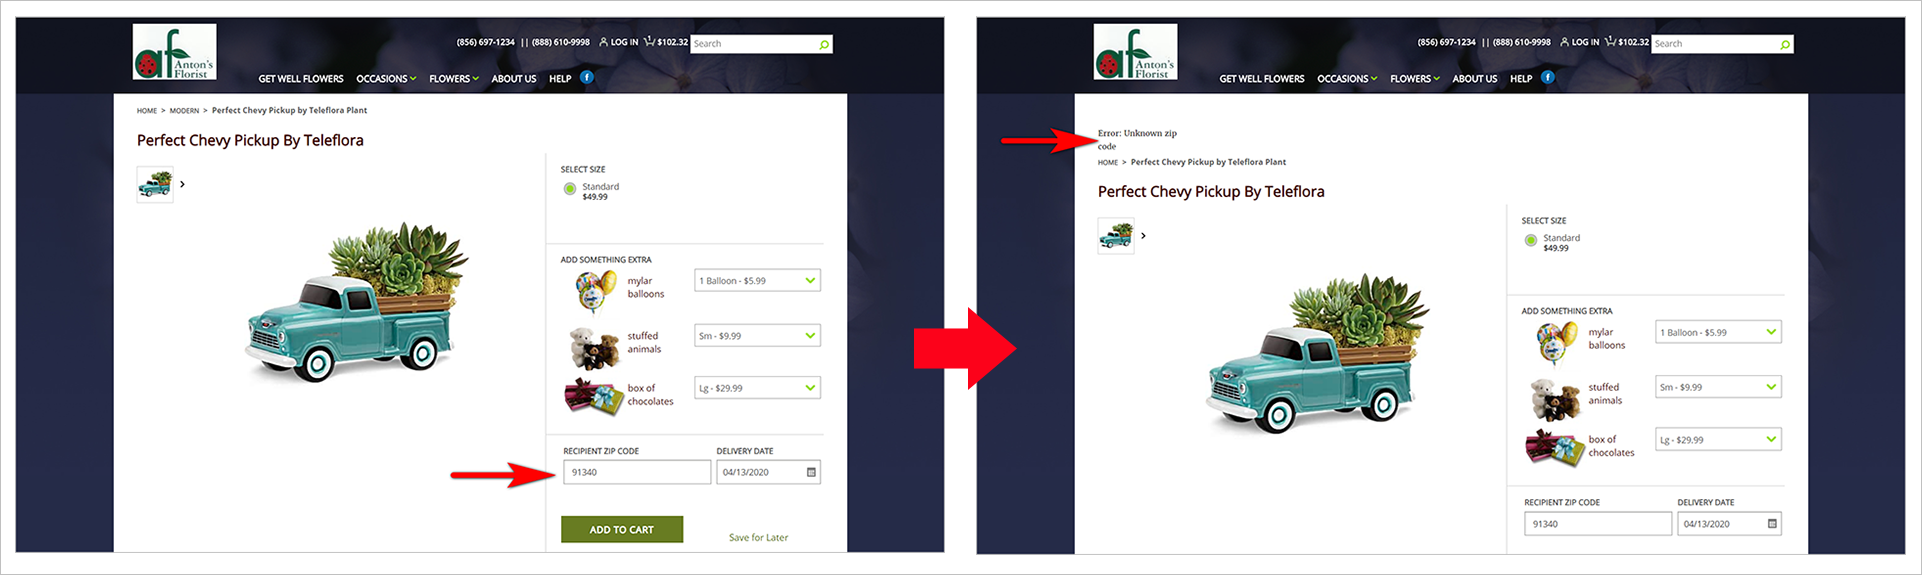 reduce cognitive load: lack of feedback example - the image on the right side shows antonsfloristnj.com's pdp with the product image on left side and dropdown options, a zip code field, a delivery date selector, and an "add to cart" button on the right side of the page. the image on the left side shows what happens when the user puts in a zip code the company does not cater to and clicks "add to cart" - the pdp remains the same but shows the message "error: unknown zip code" in the upper left corner, above the breadcrumbs 